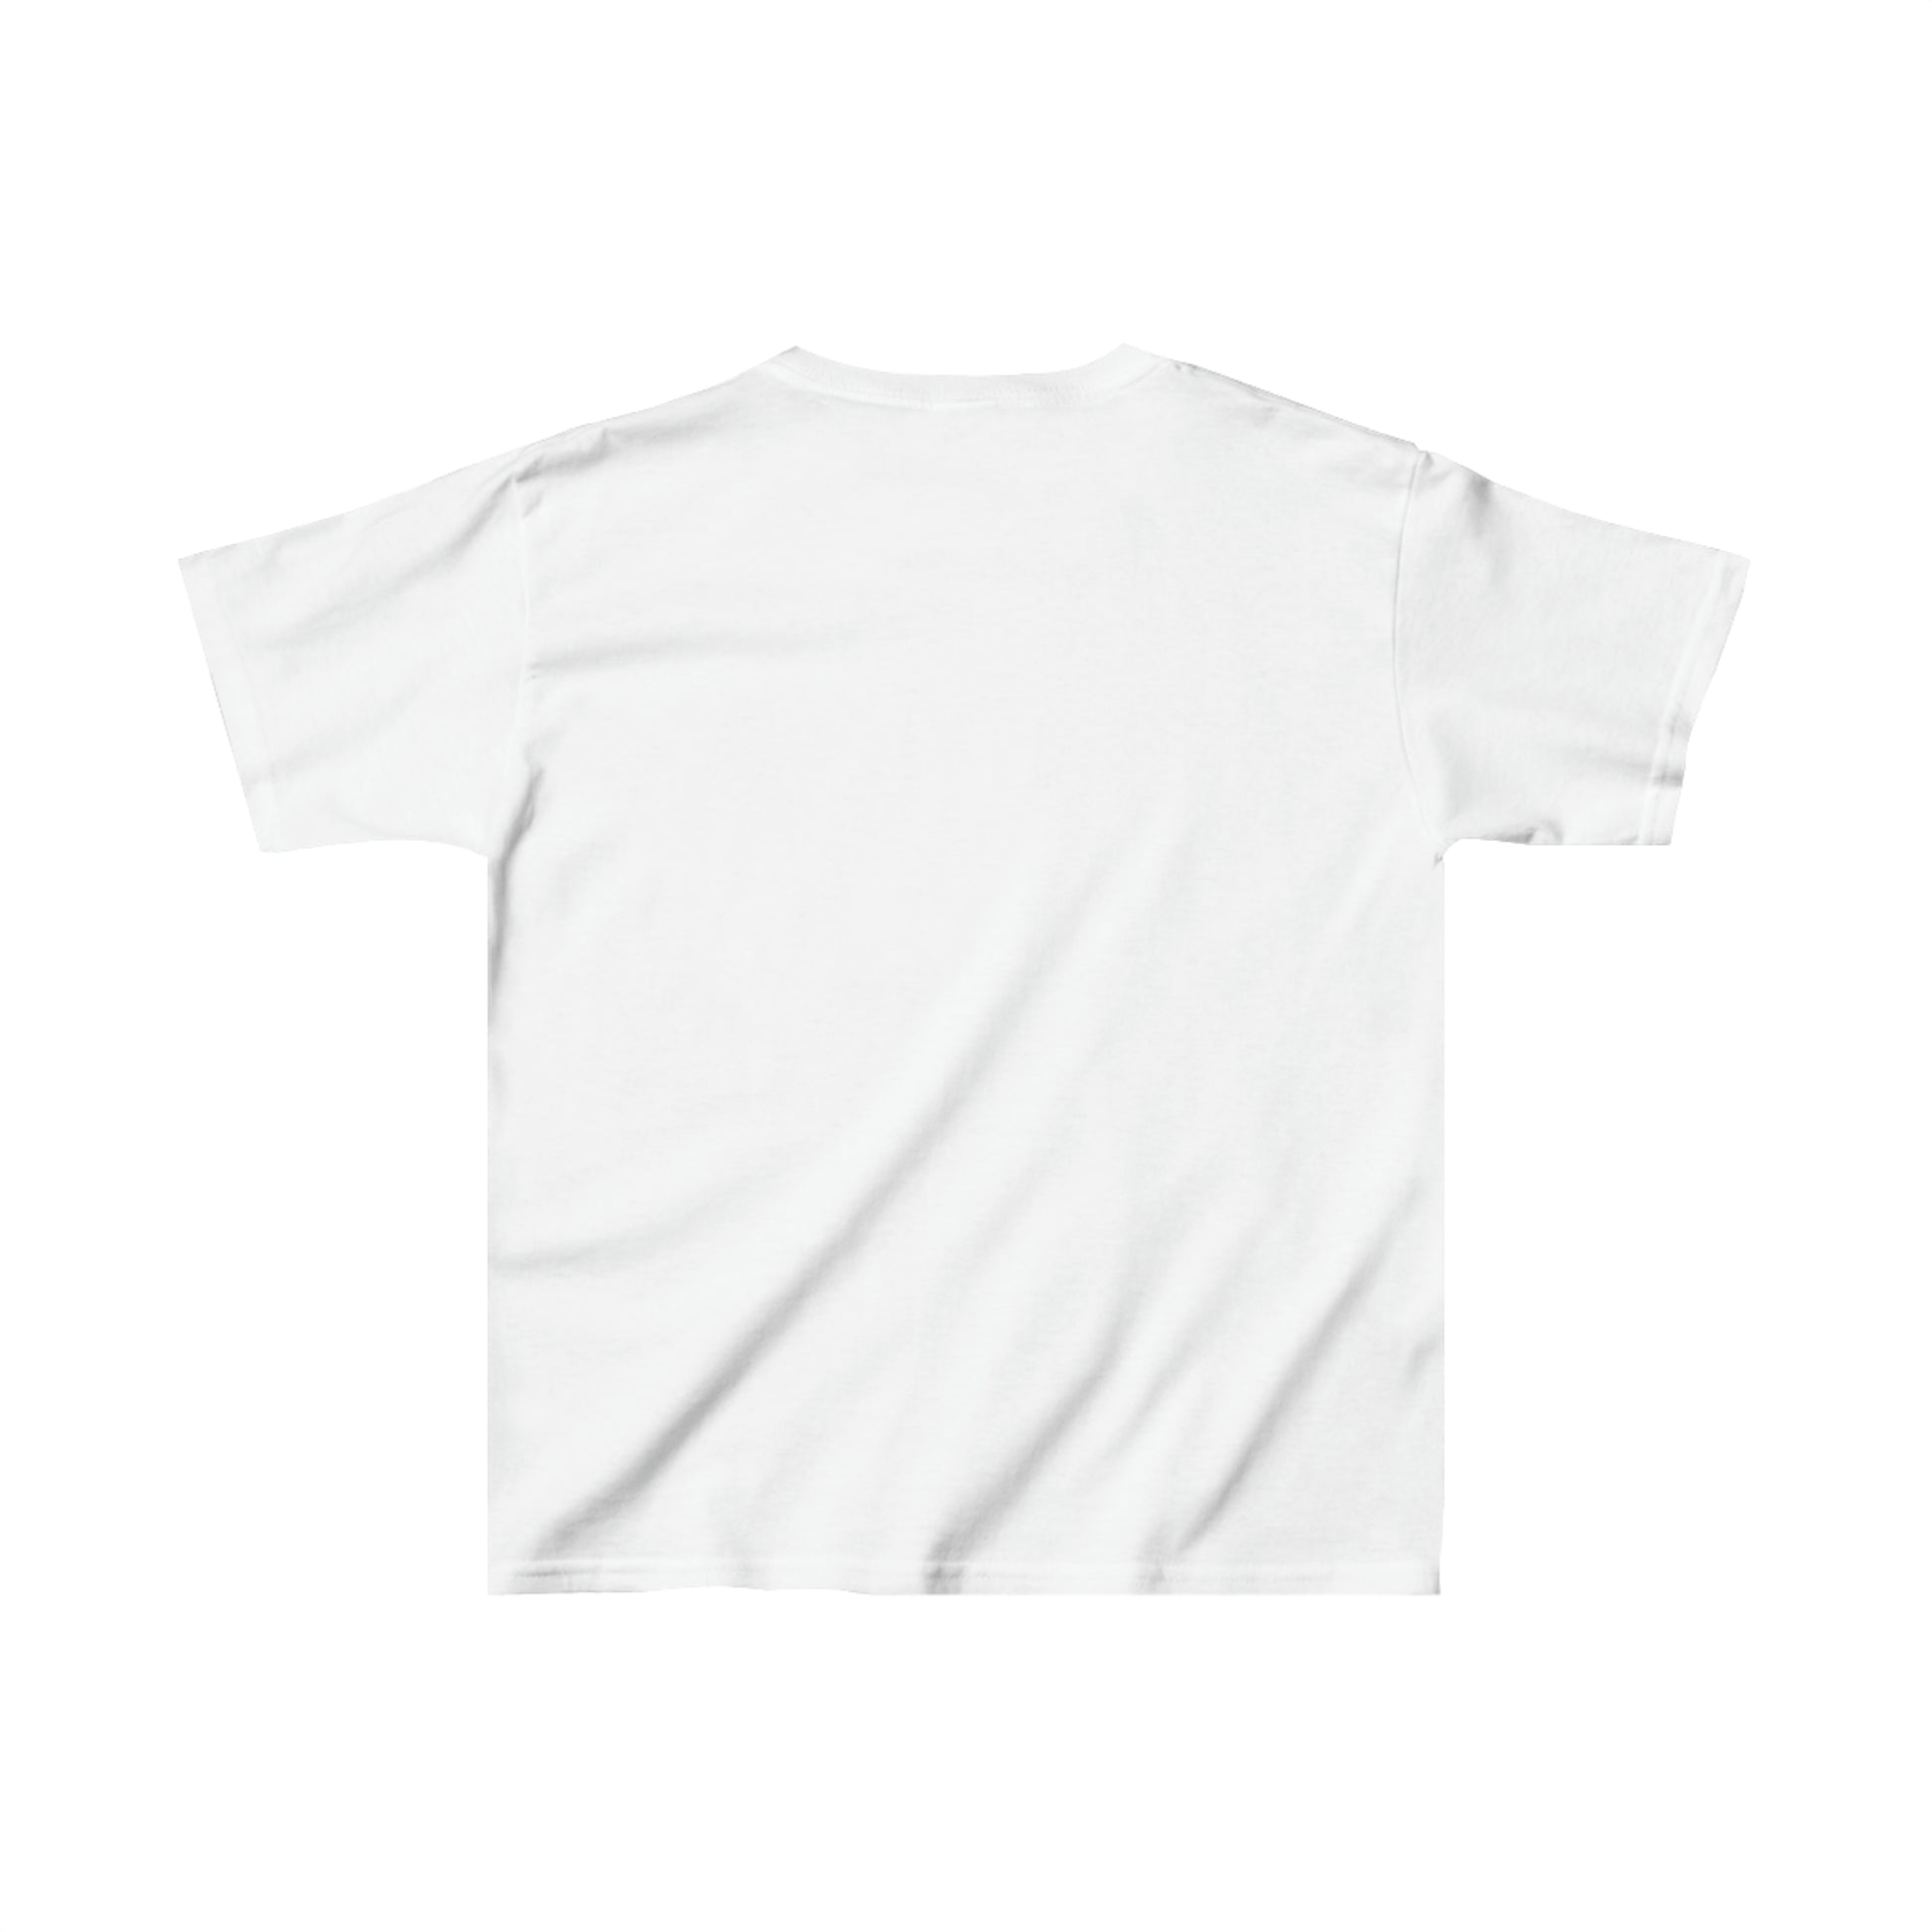 a white t - shirt on a white background